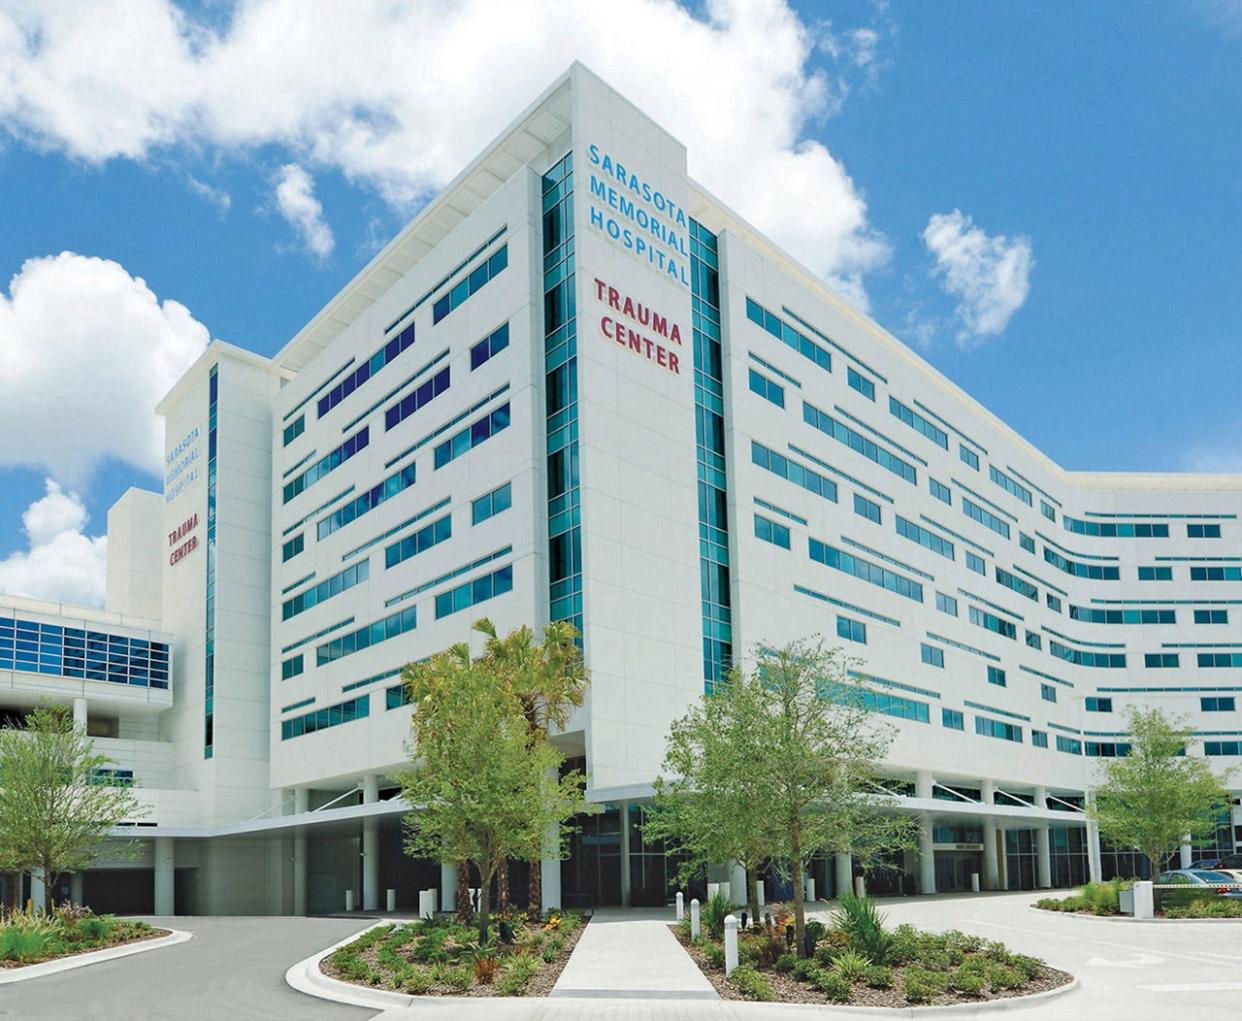 The League of Women Voters of Sarasota County has scheduled a candidate forum for the Sarasota County Public Hospital Board. The forum, which will feature only Republican candidates, is scheduled for 5:30 to 7 p.m., July 11, at Frances T. Bourne Jacaranda Public Library.